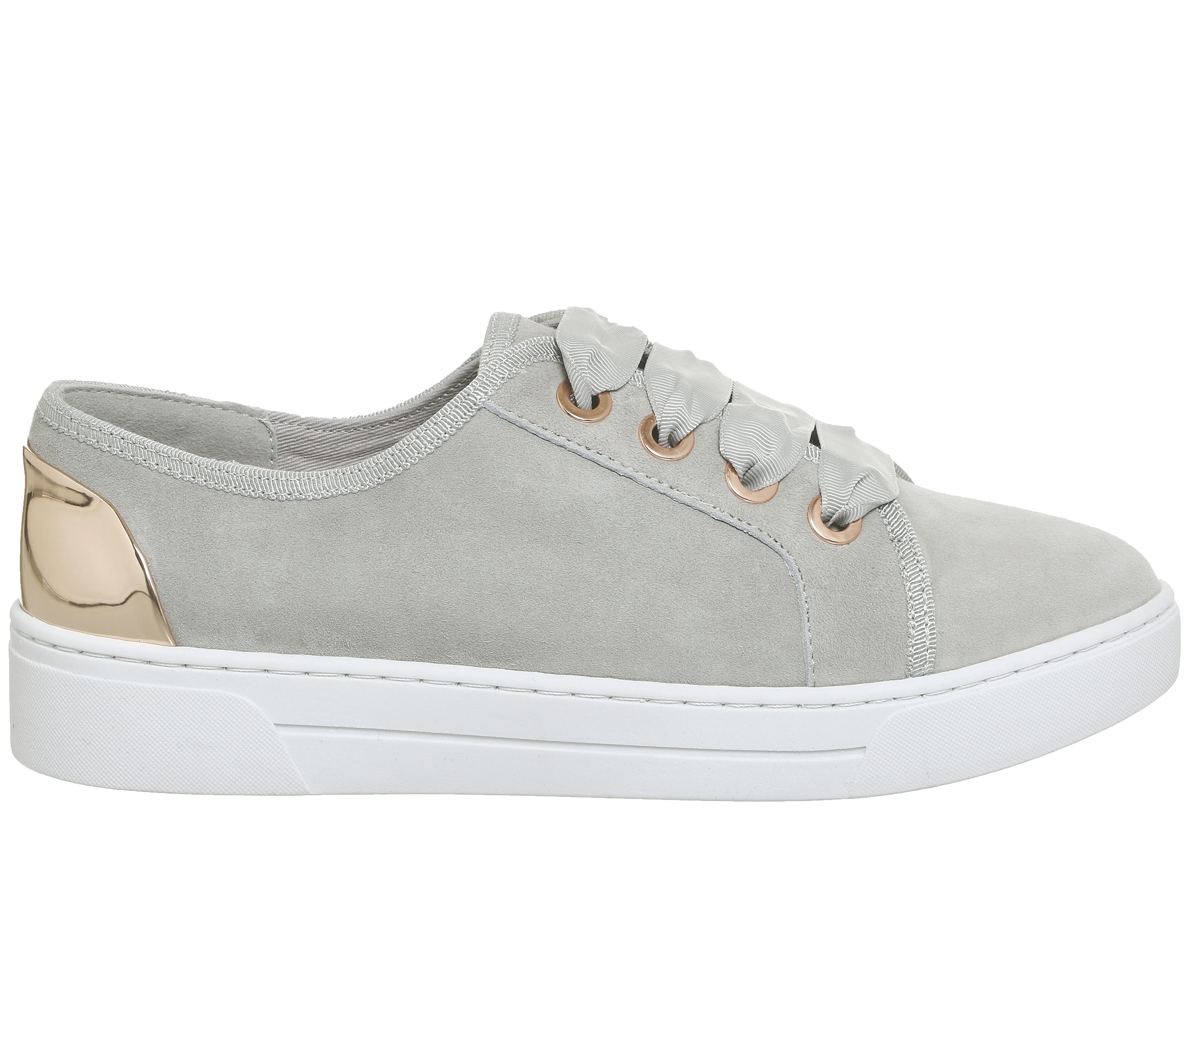 Office Adore Metallic Detail Trainers Ash Grey - Hers trainers